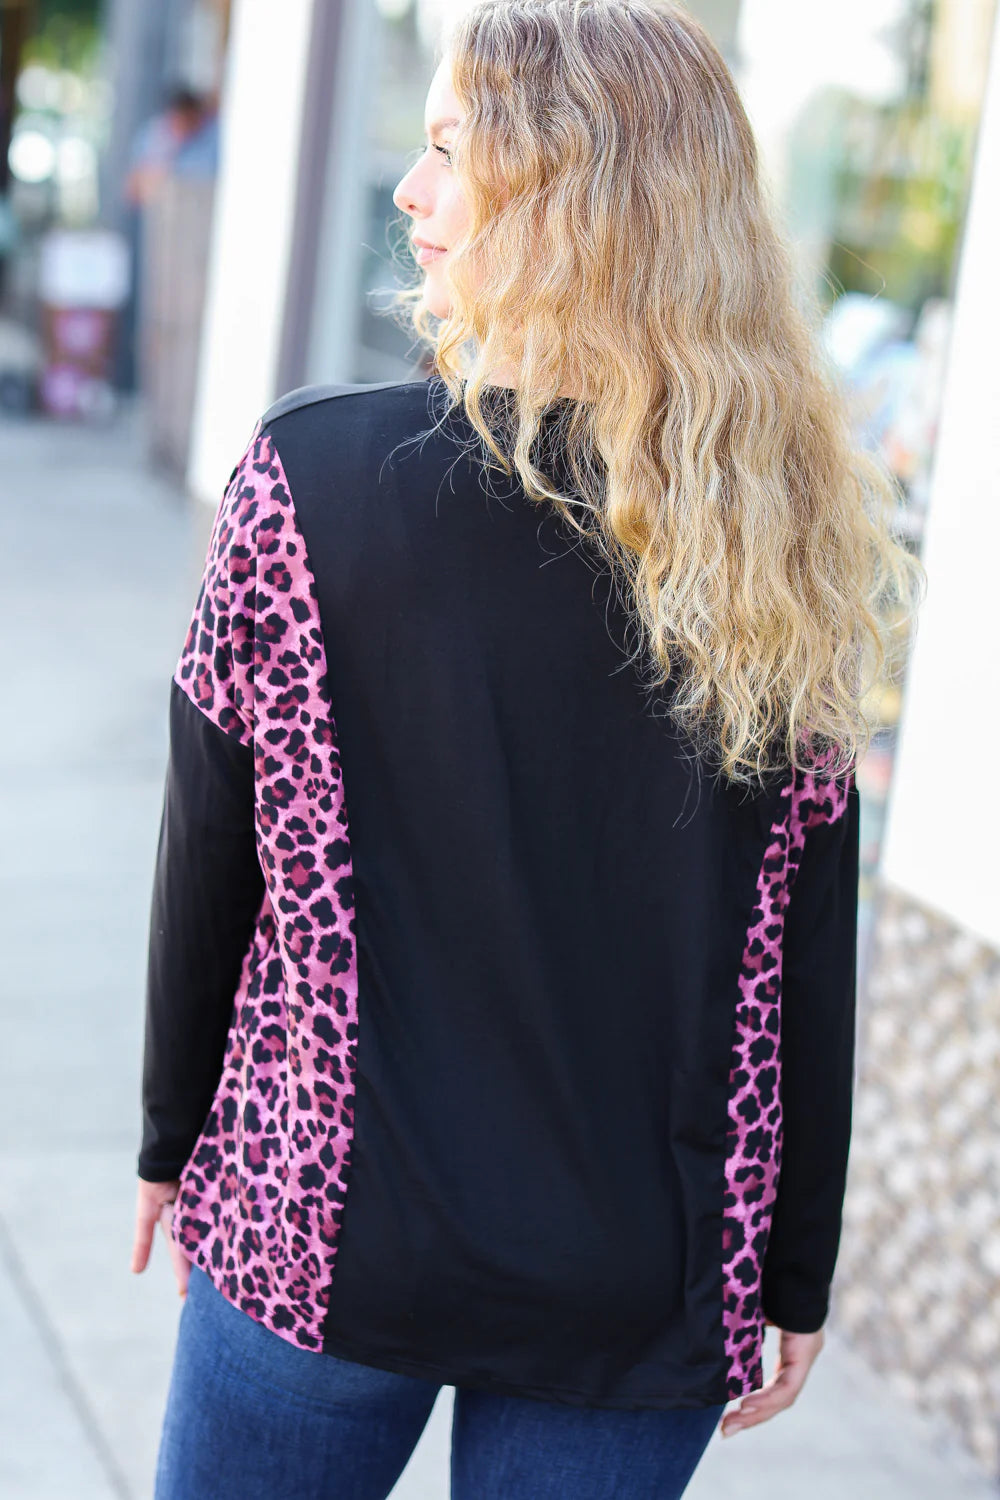 Back view,  a unique and vibrant pink animal print